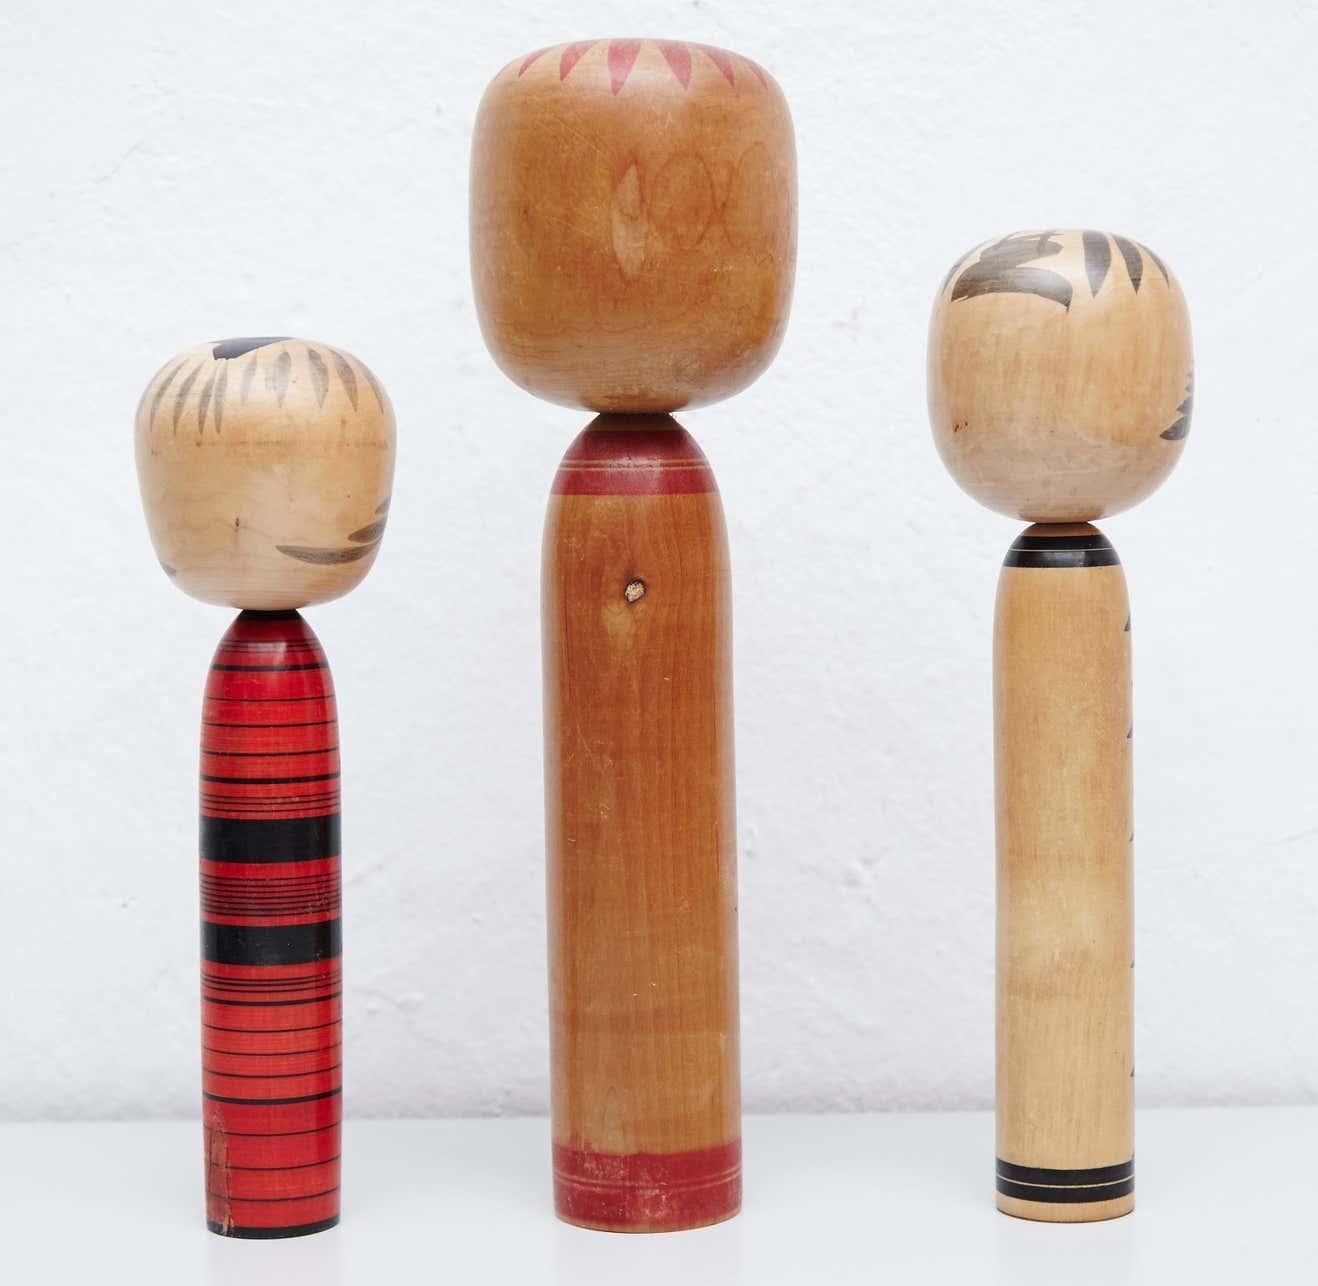 Japanese dolls called Kokeshi of the early 20th century.
Provenance from the northern Japan.
Set of 3.

Measures: 

30 x 8 cm
38 x 8 cm
36 x 10.5 cm


Handmade by Japanese artisants from wood. Have a simple trunk as a body and an enlarged